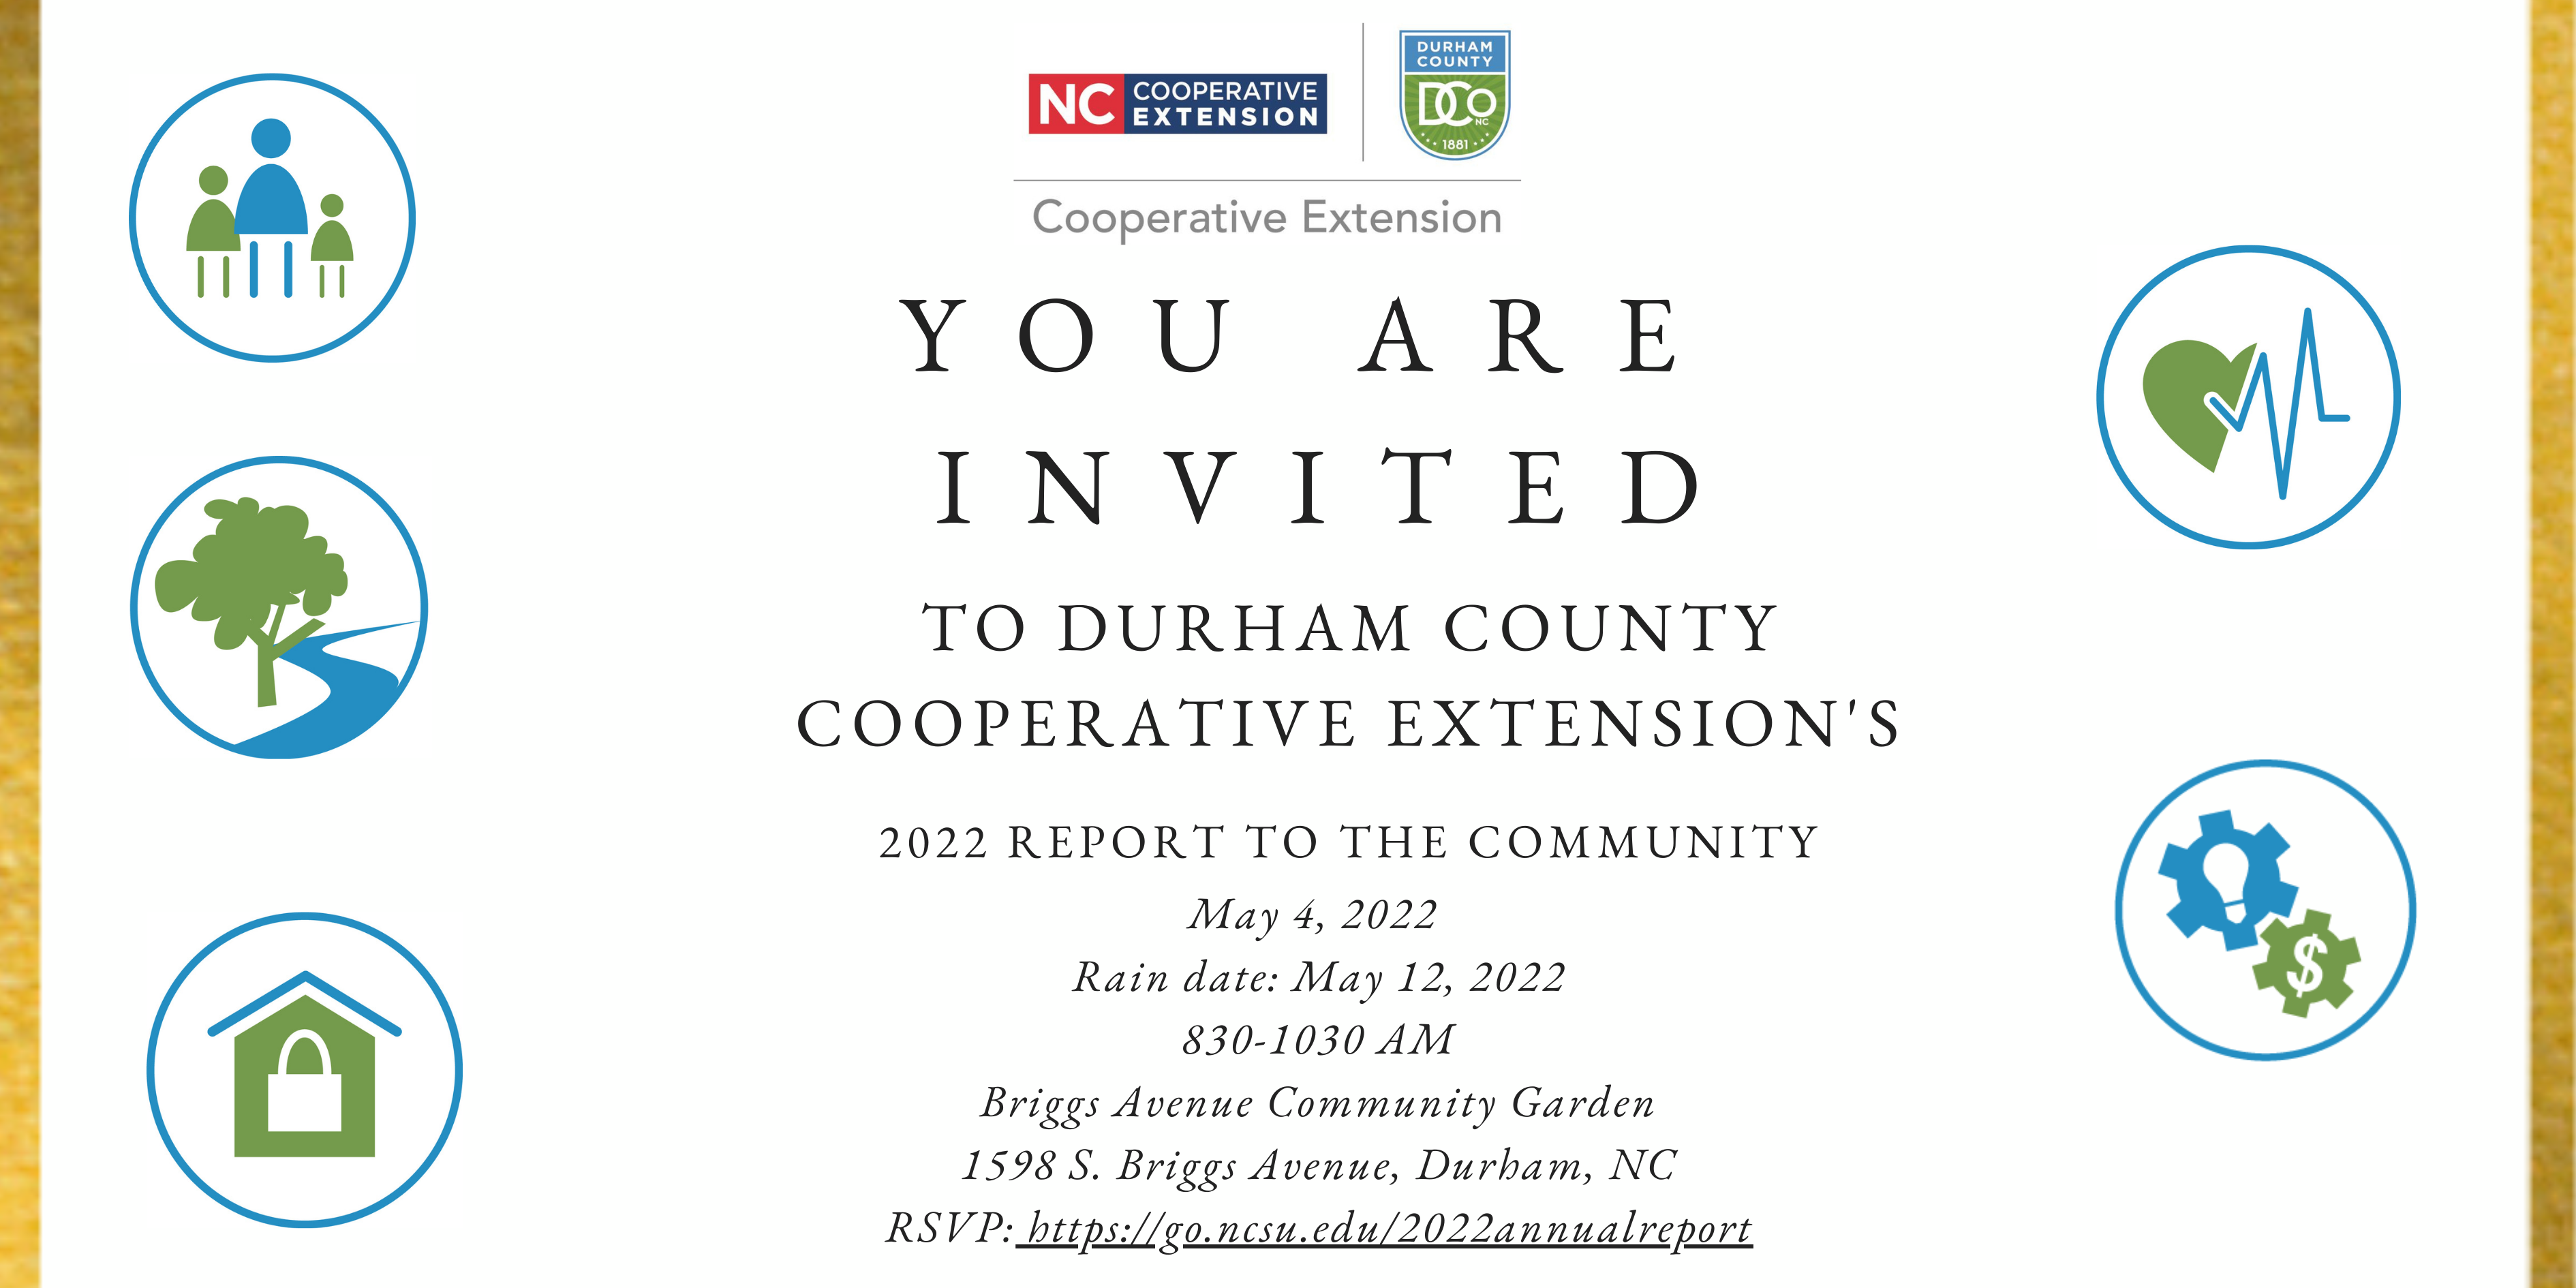 You are invited to Durham County Cooperative Extension's 2022 Report to the Community.